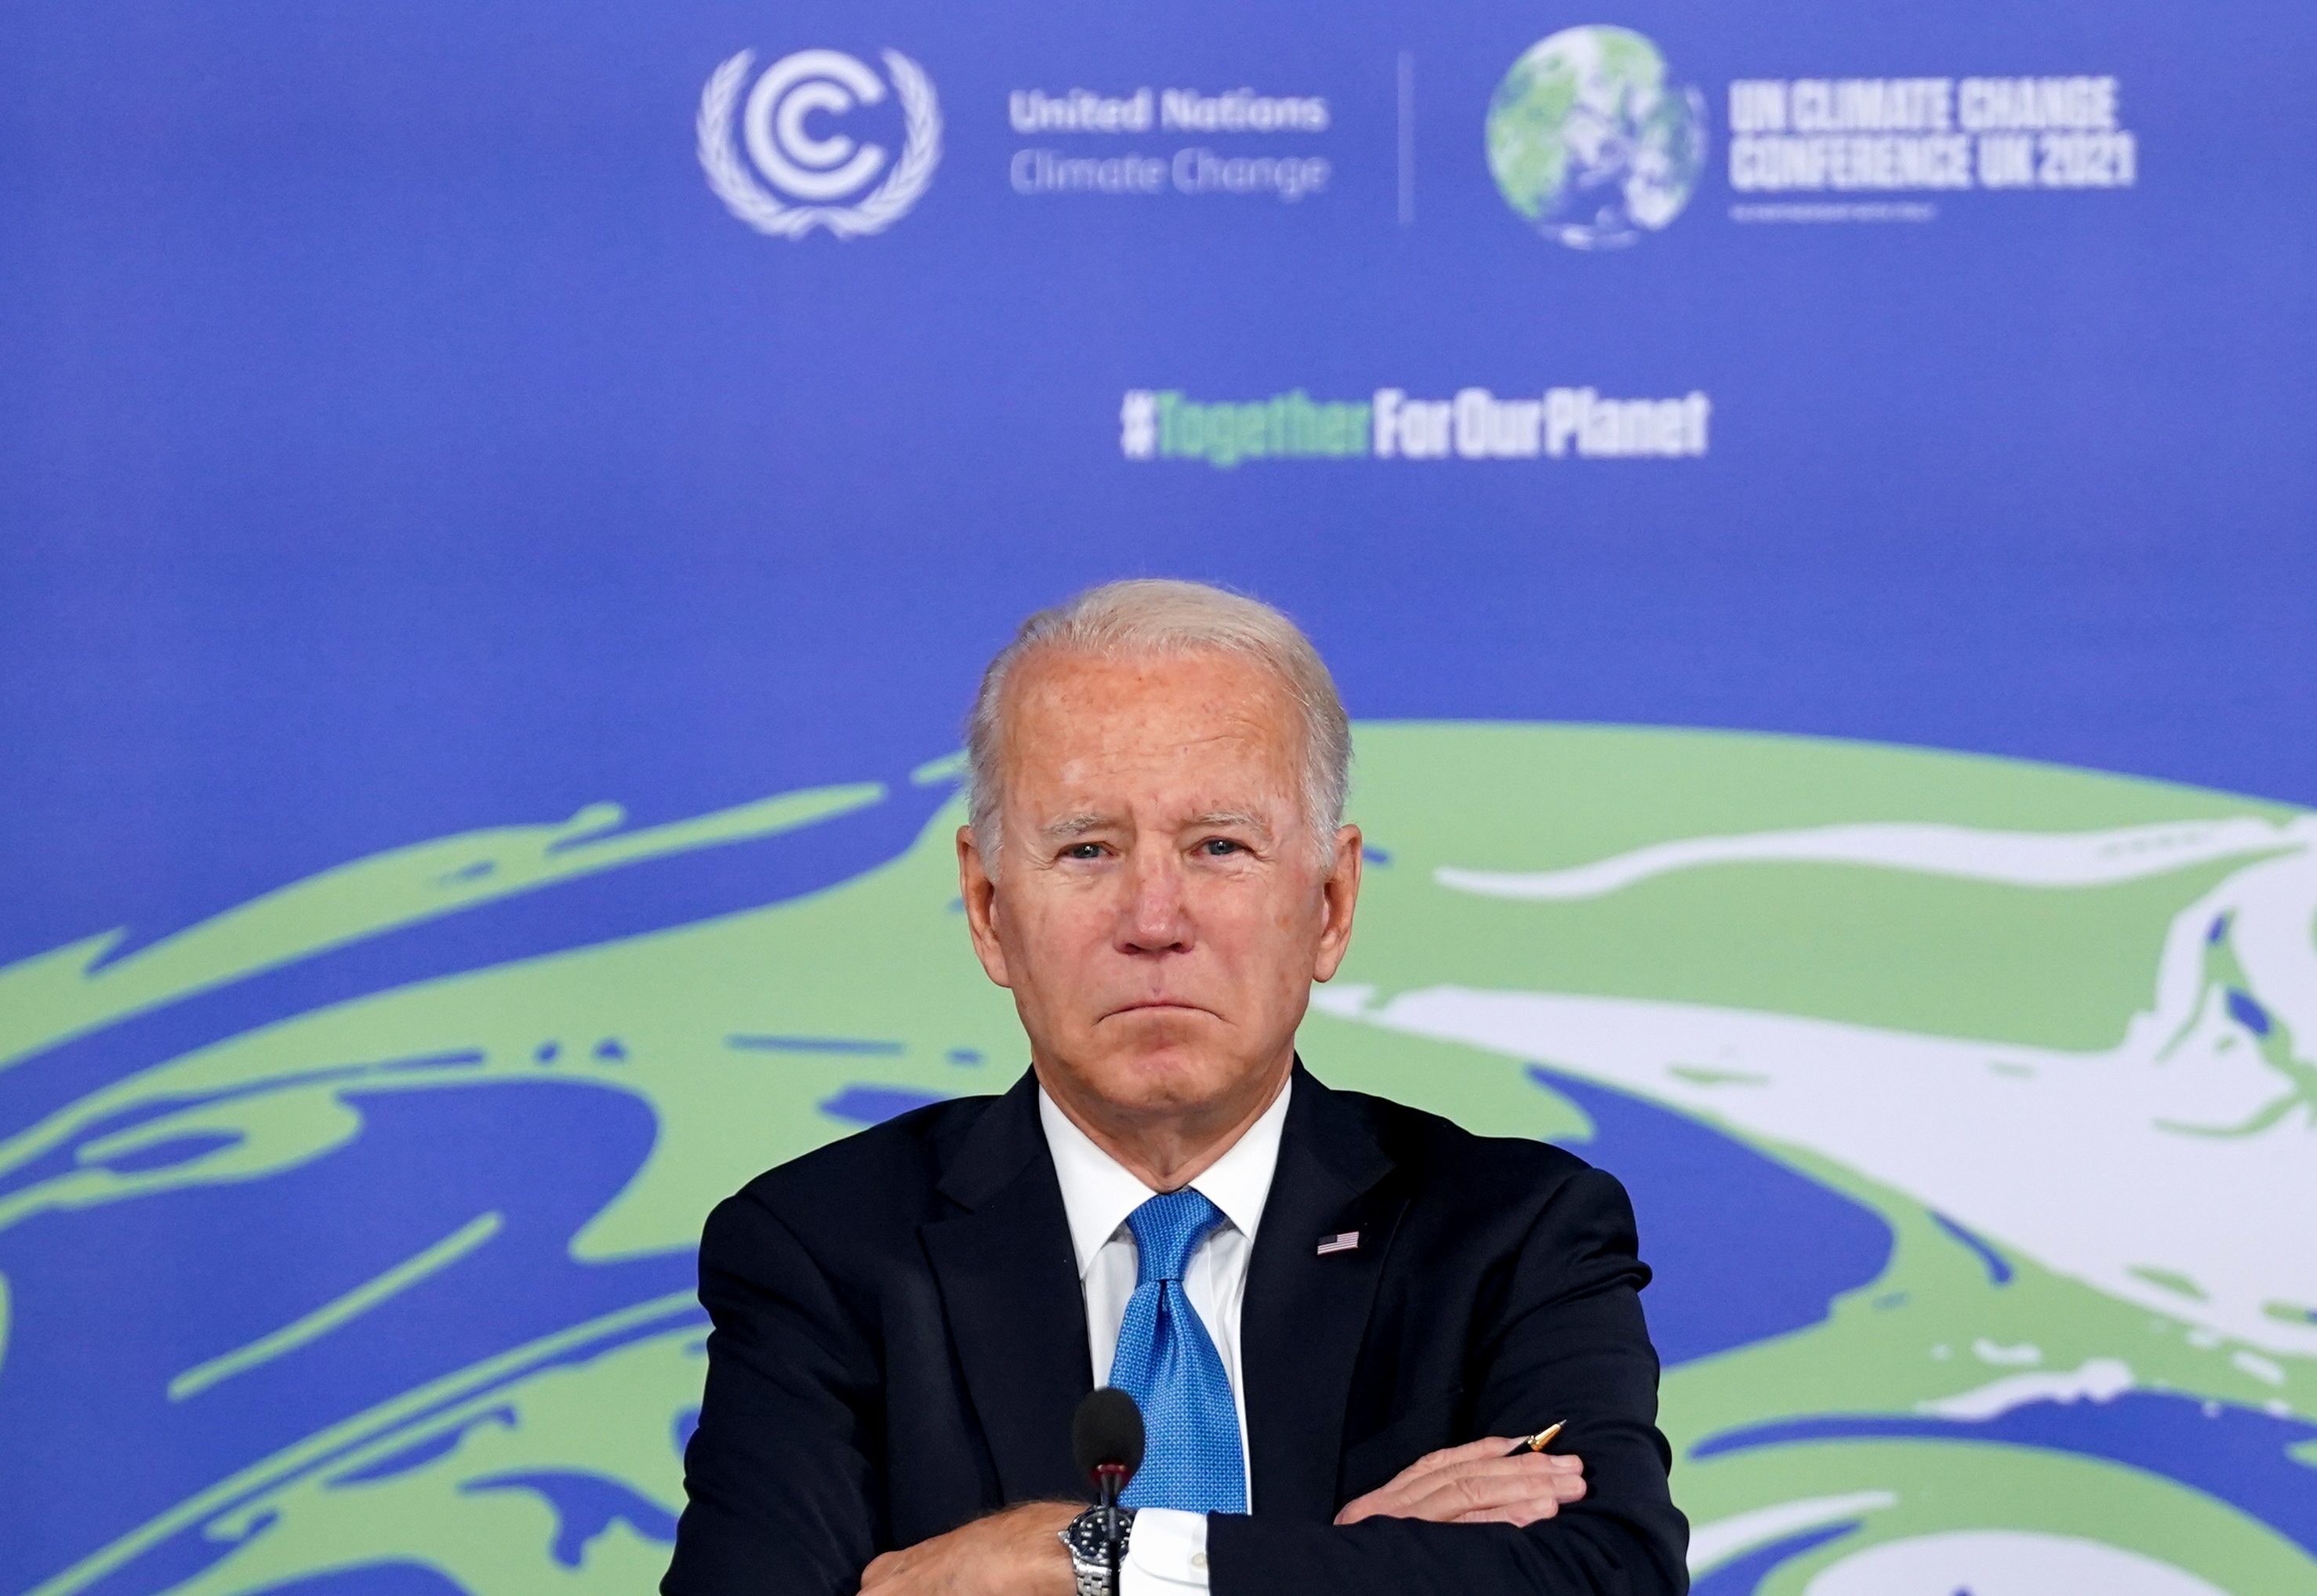 U.S. President Joe Biden participates in a meeting on the Build Back Better World (B3W) initiative during the UN Climate Change Conference (COP26) in Glasgow